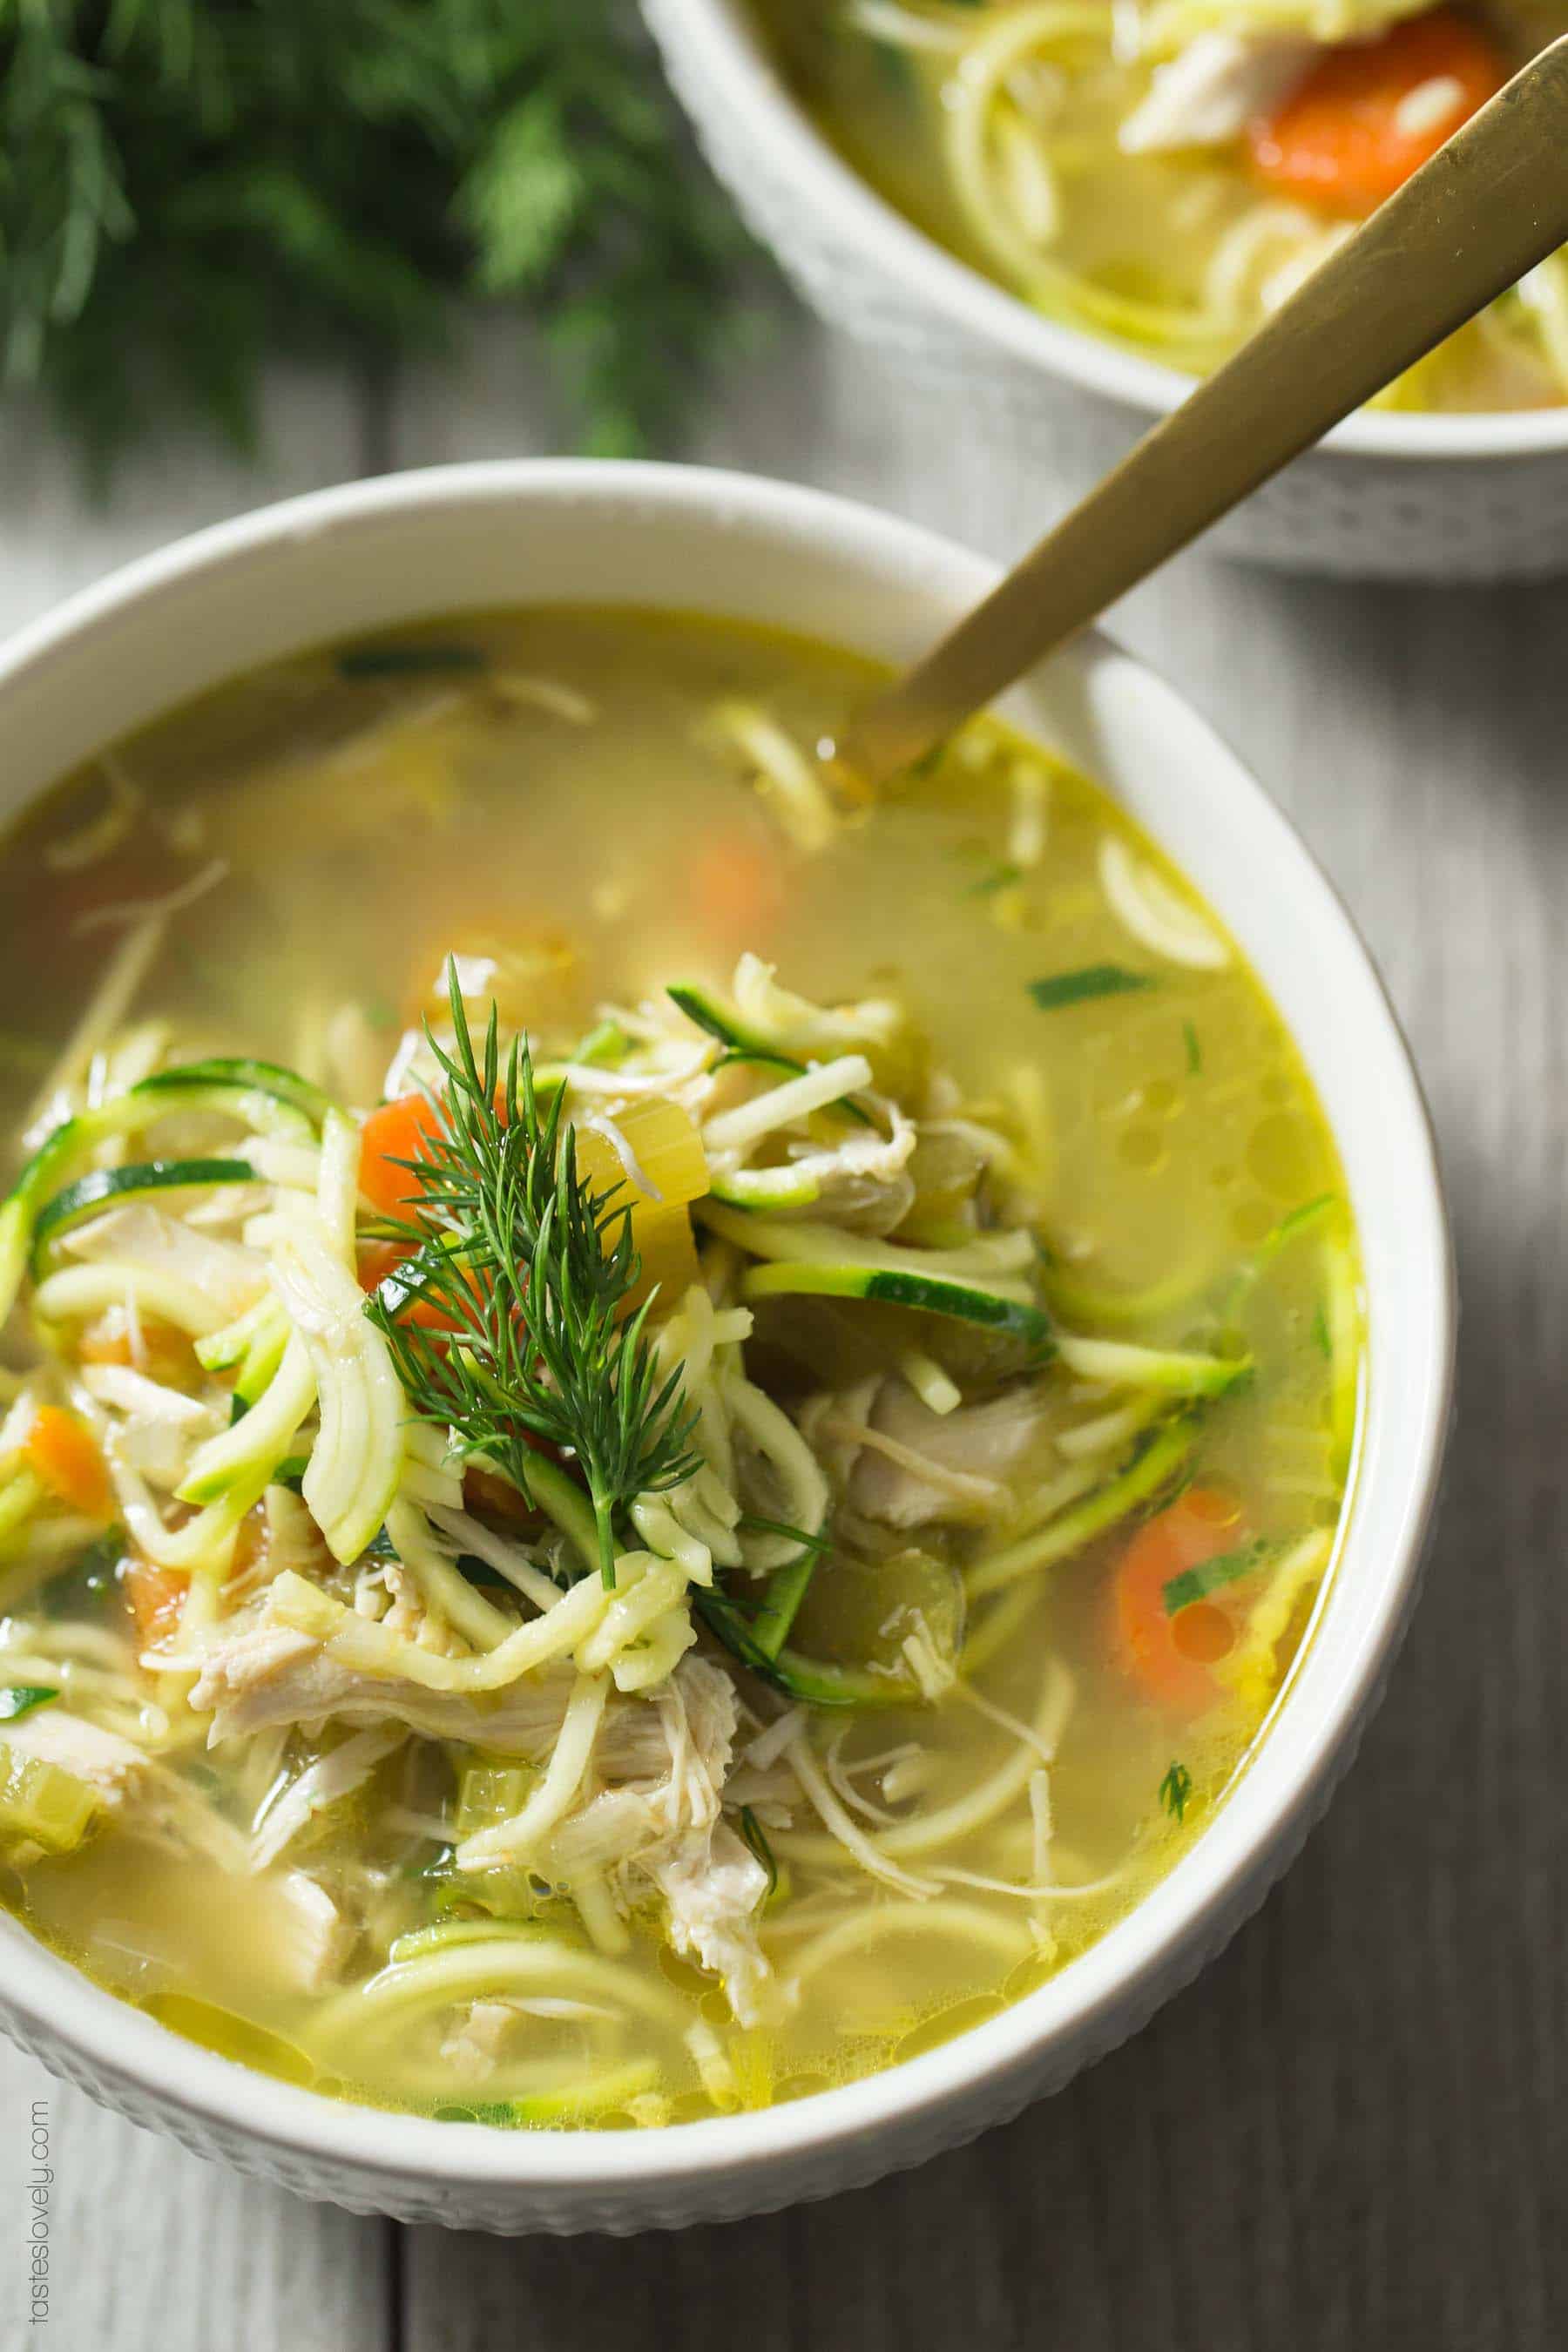 Chicken Zoodle Soup with Dill - comforting and healing recipe with the most amazing broth! (Paleo, Whole30, dairy free, gluten free, grain free, low carb)